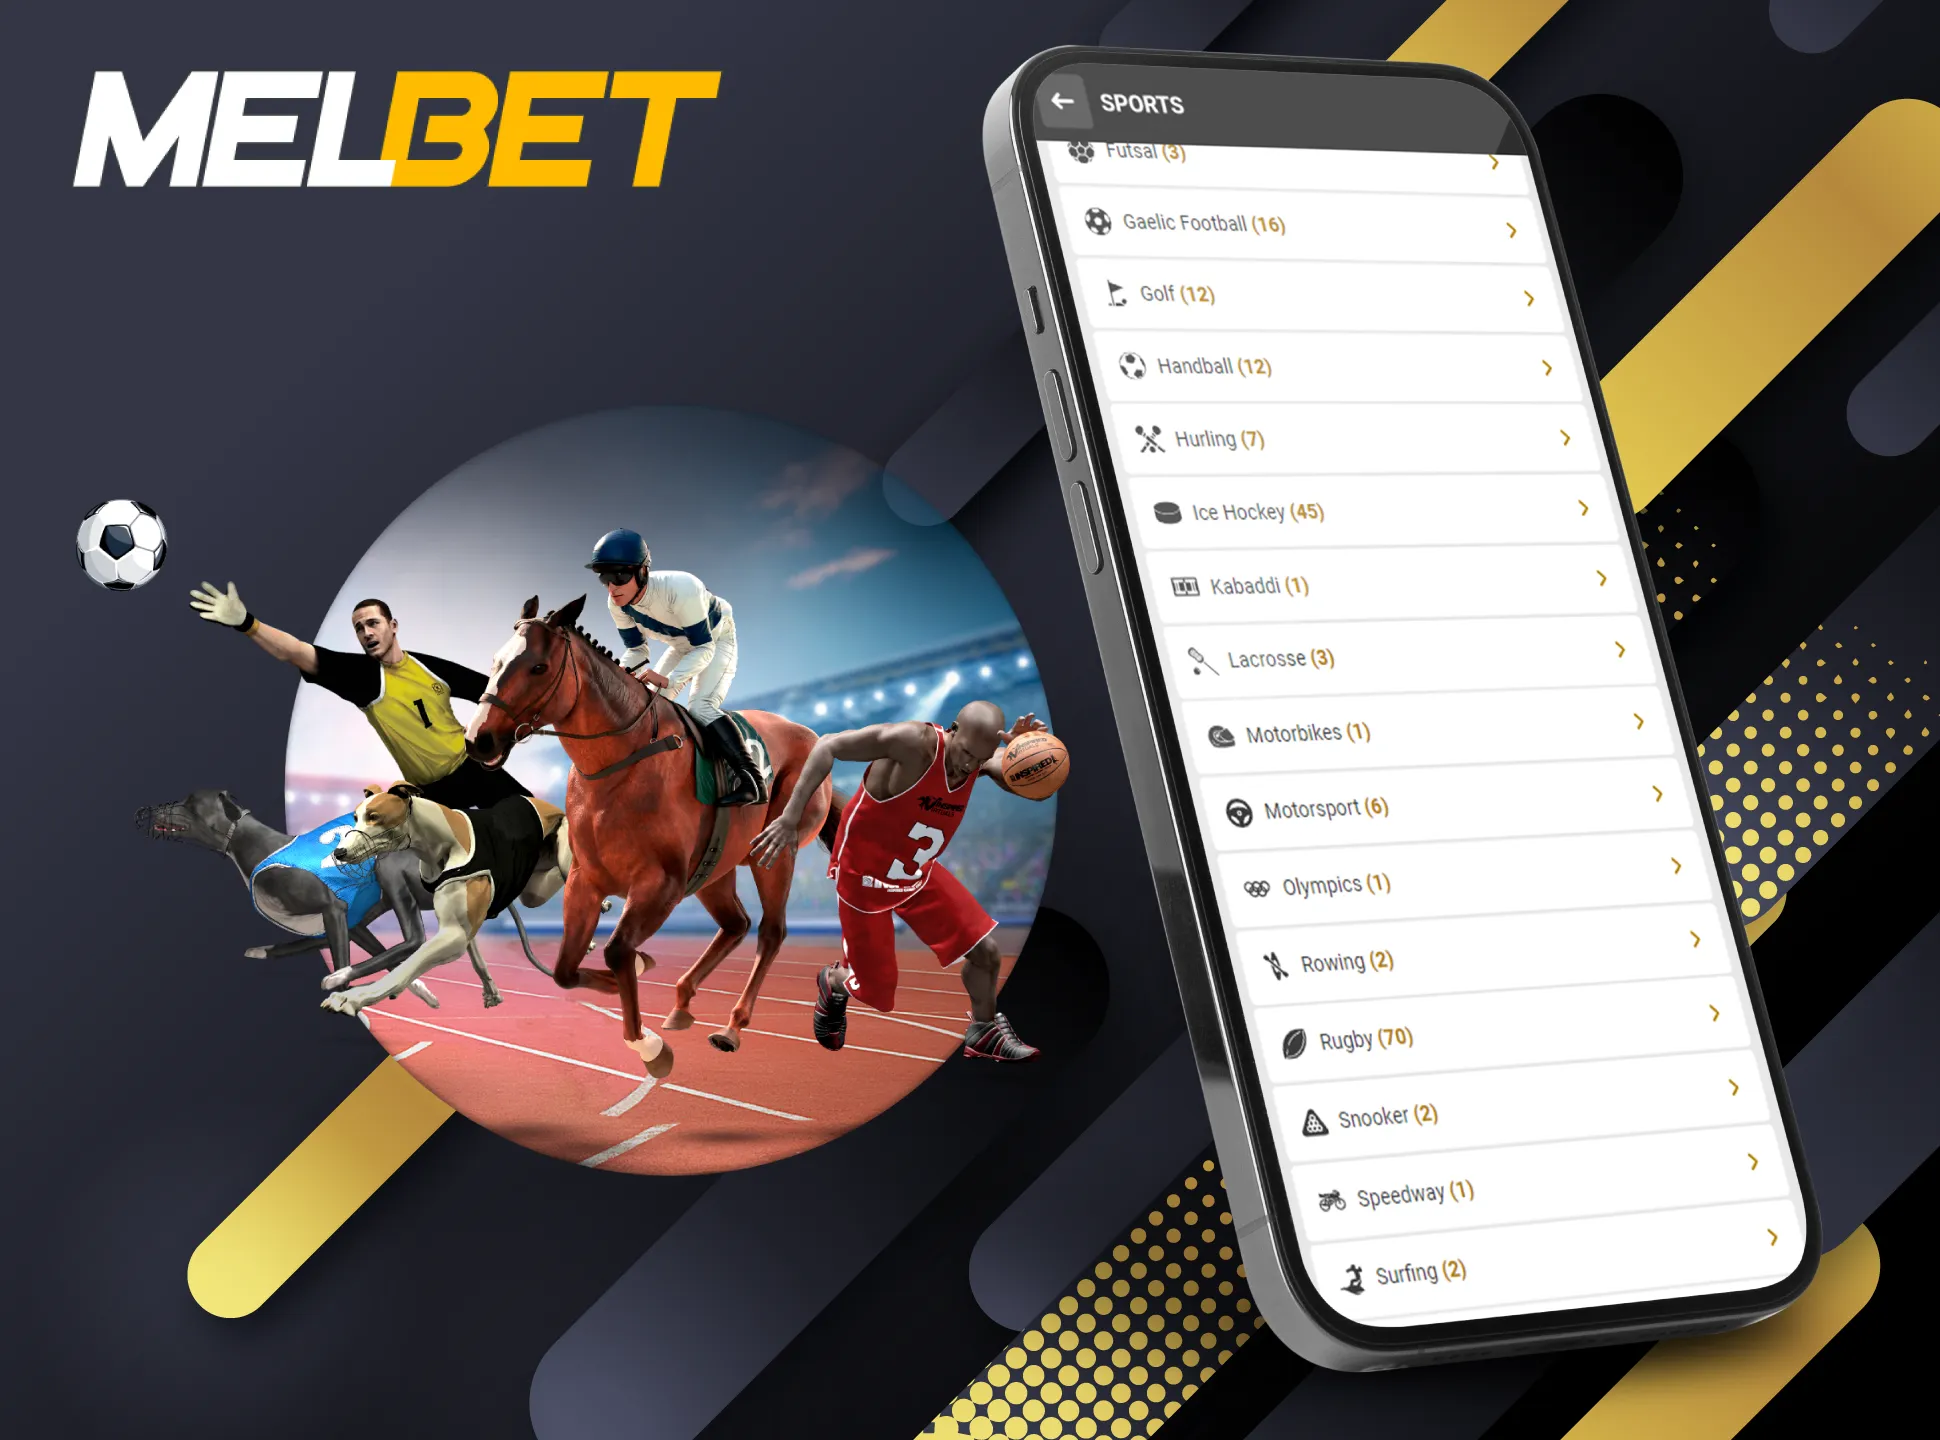 You can choose horse racing, cricket, basketball and others among the virtual sports betting markets.